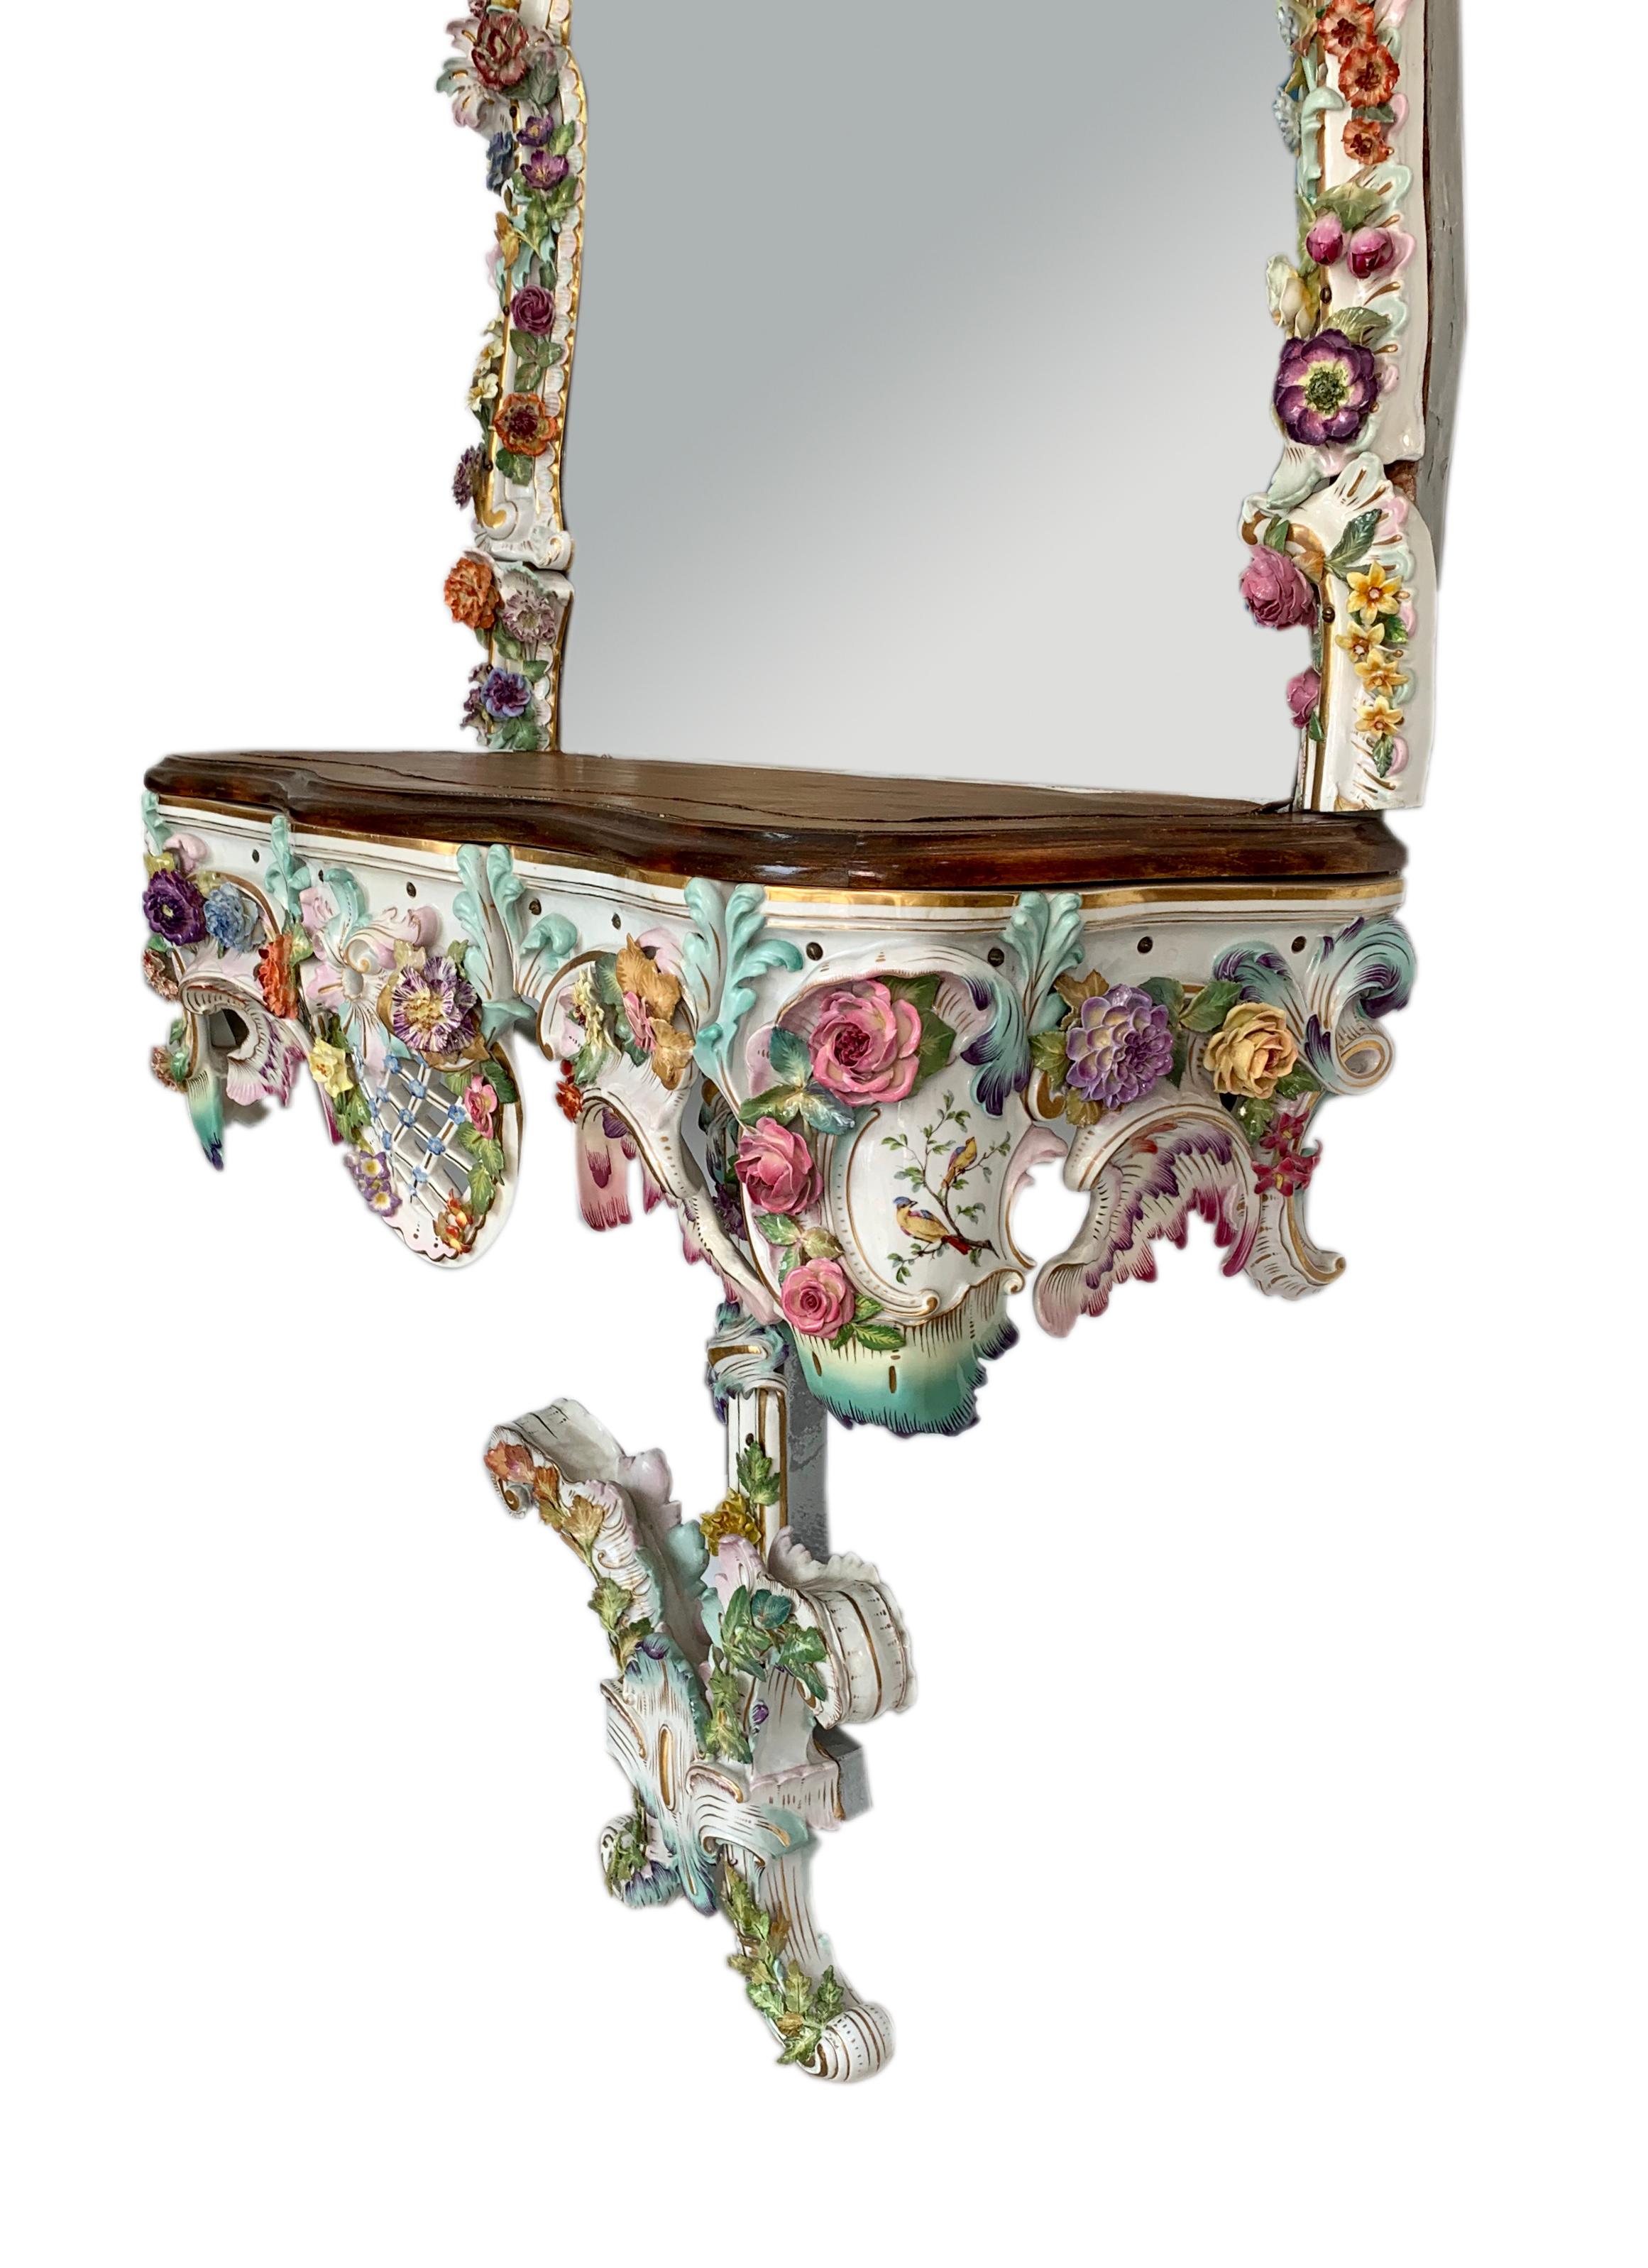 Rare Antique German Porcelain Console and Mirror For Sale 10